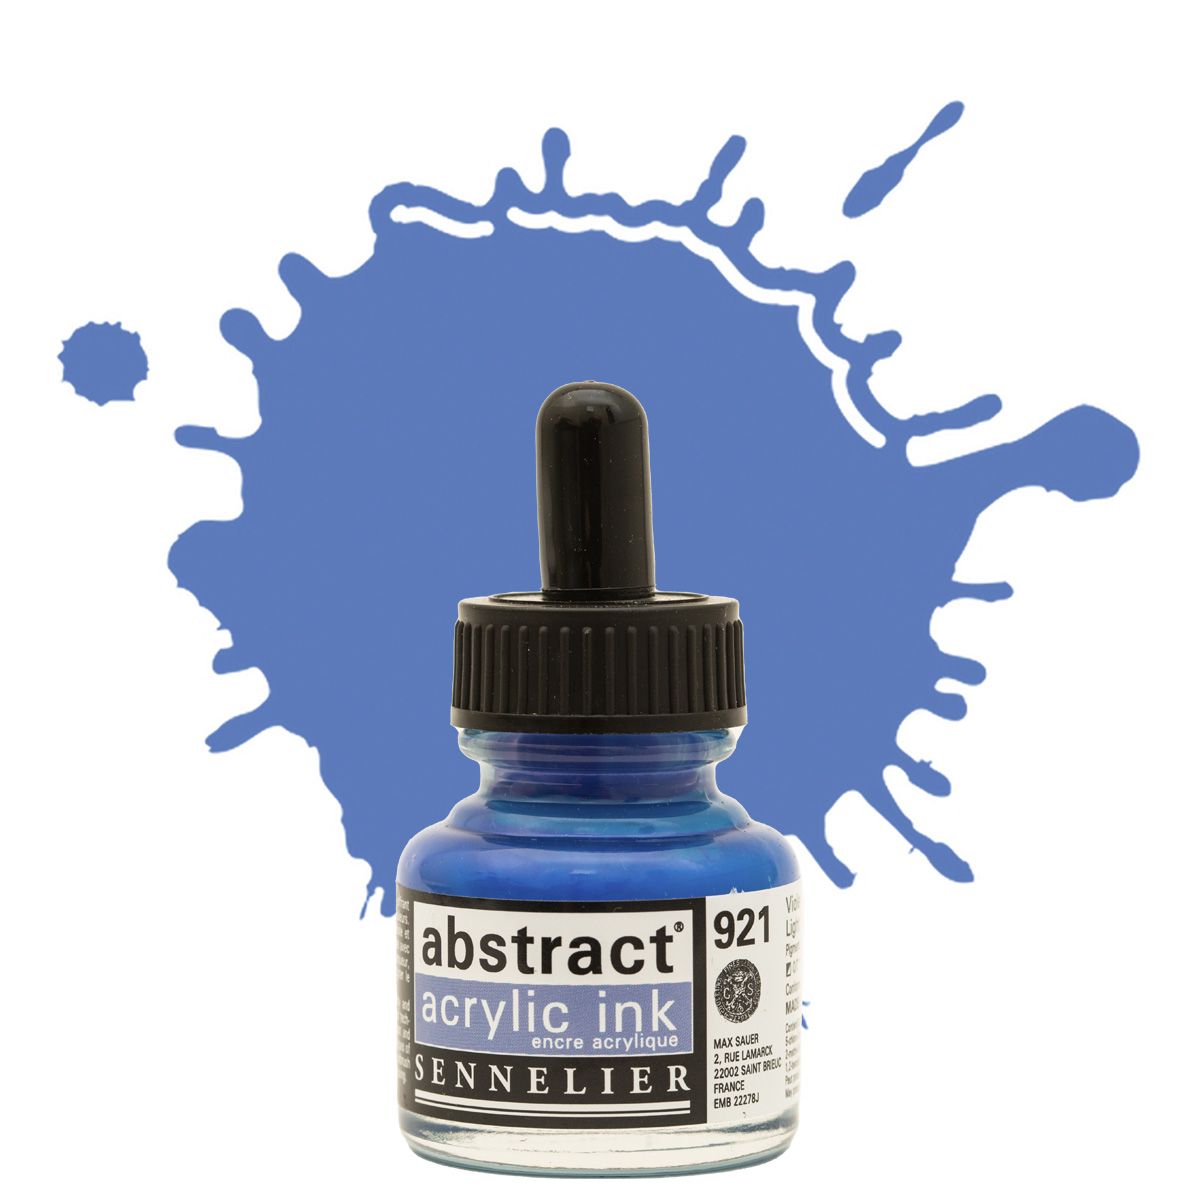 Sennelier Abstract Acrylic Ink - Light Violet, 30ml